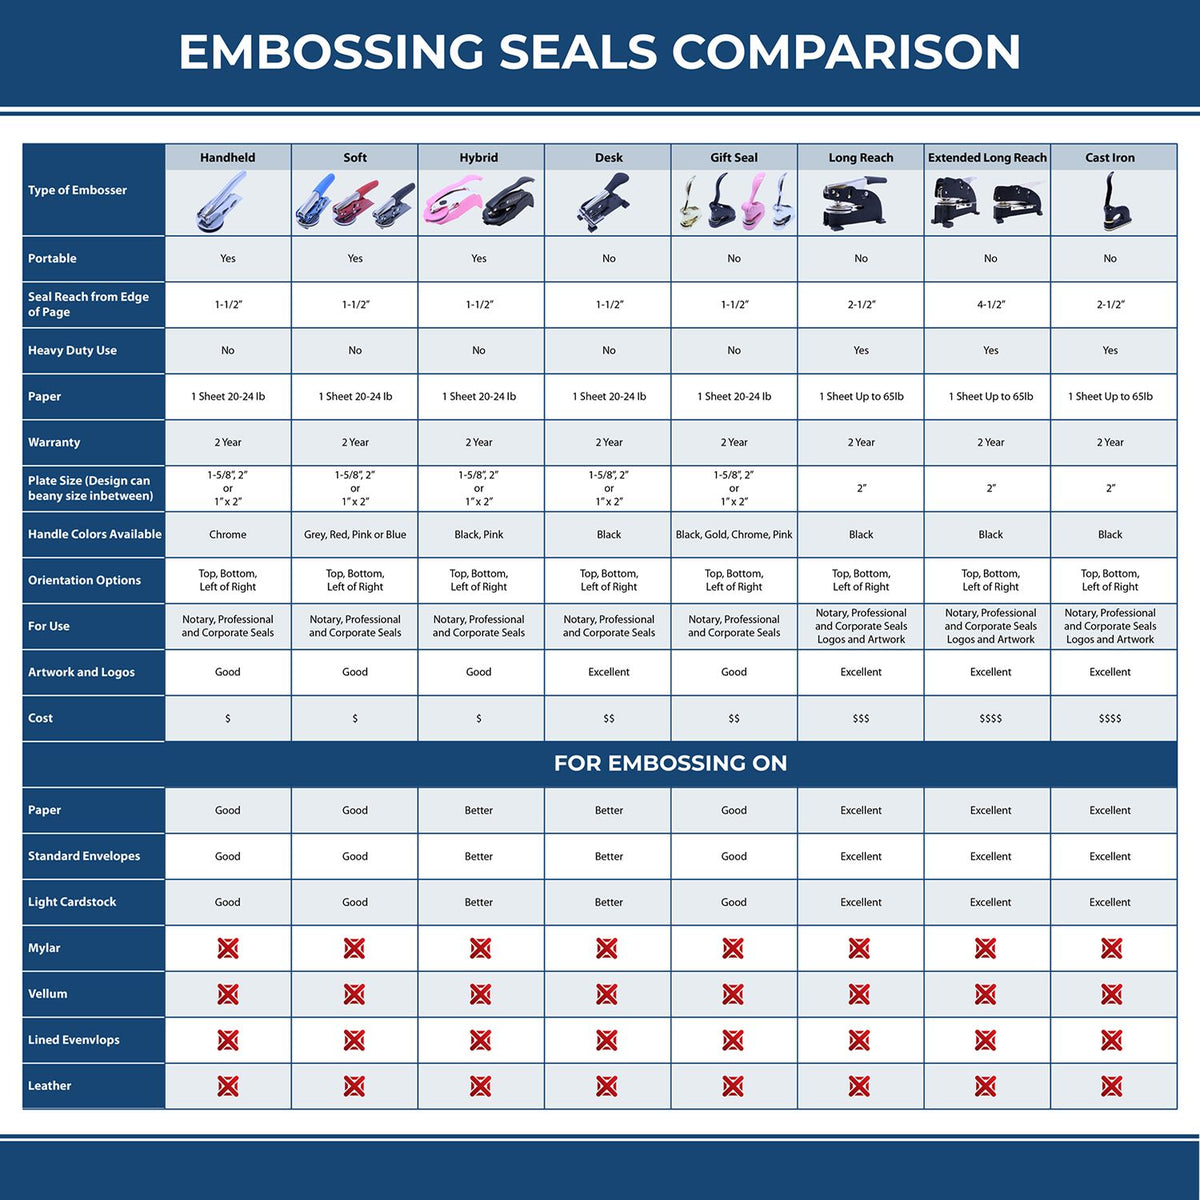 A comparison chart for the different types of mount models available for the State of Minnesota Soft Land Surveyor Embossing Seal.